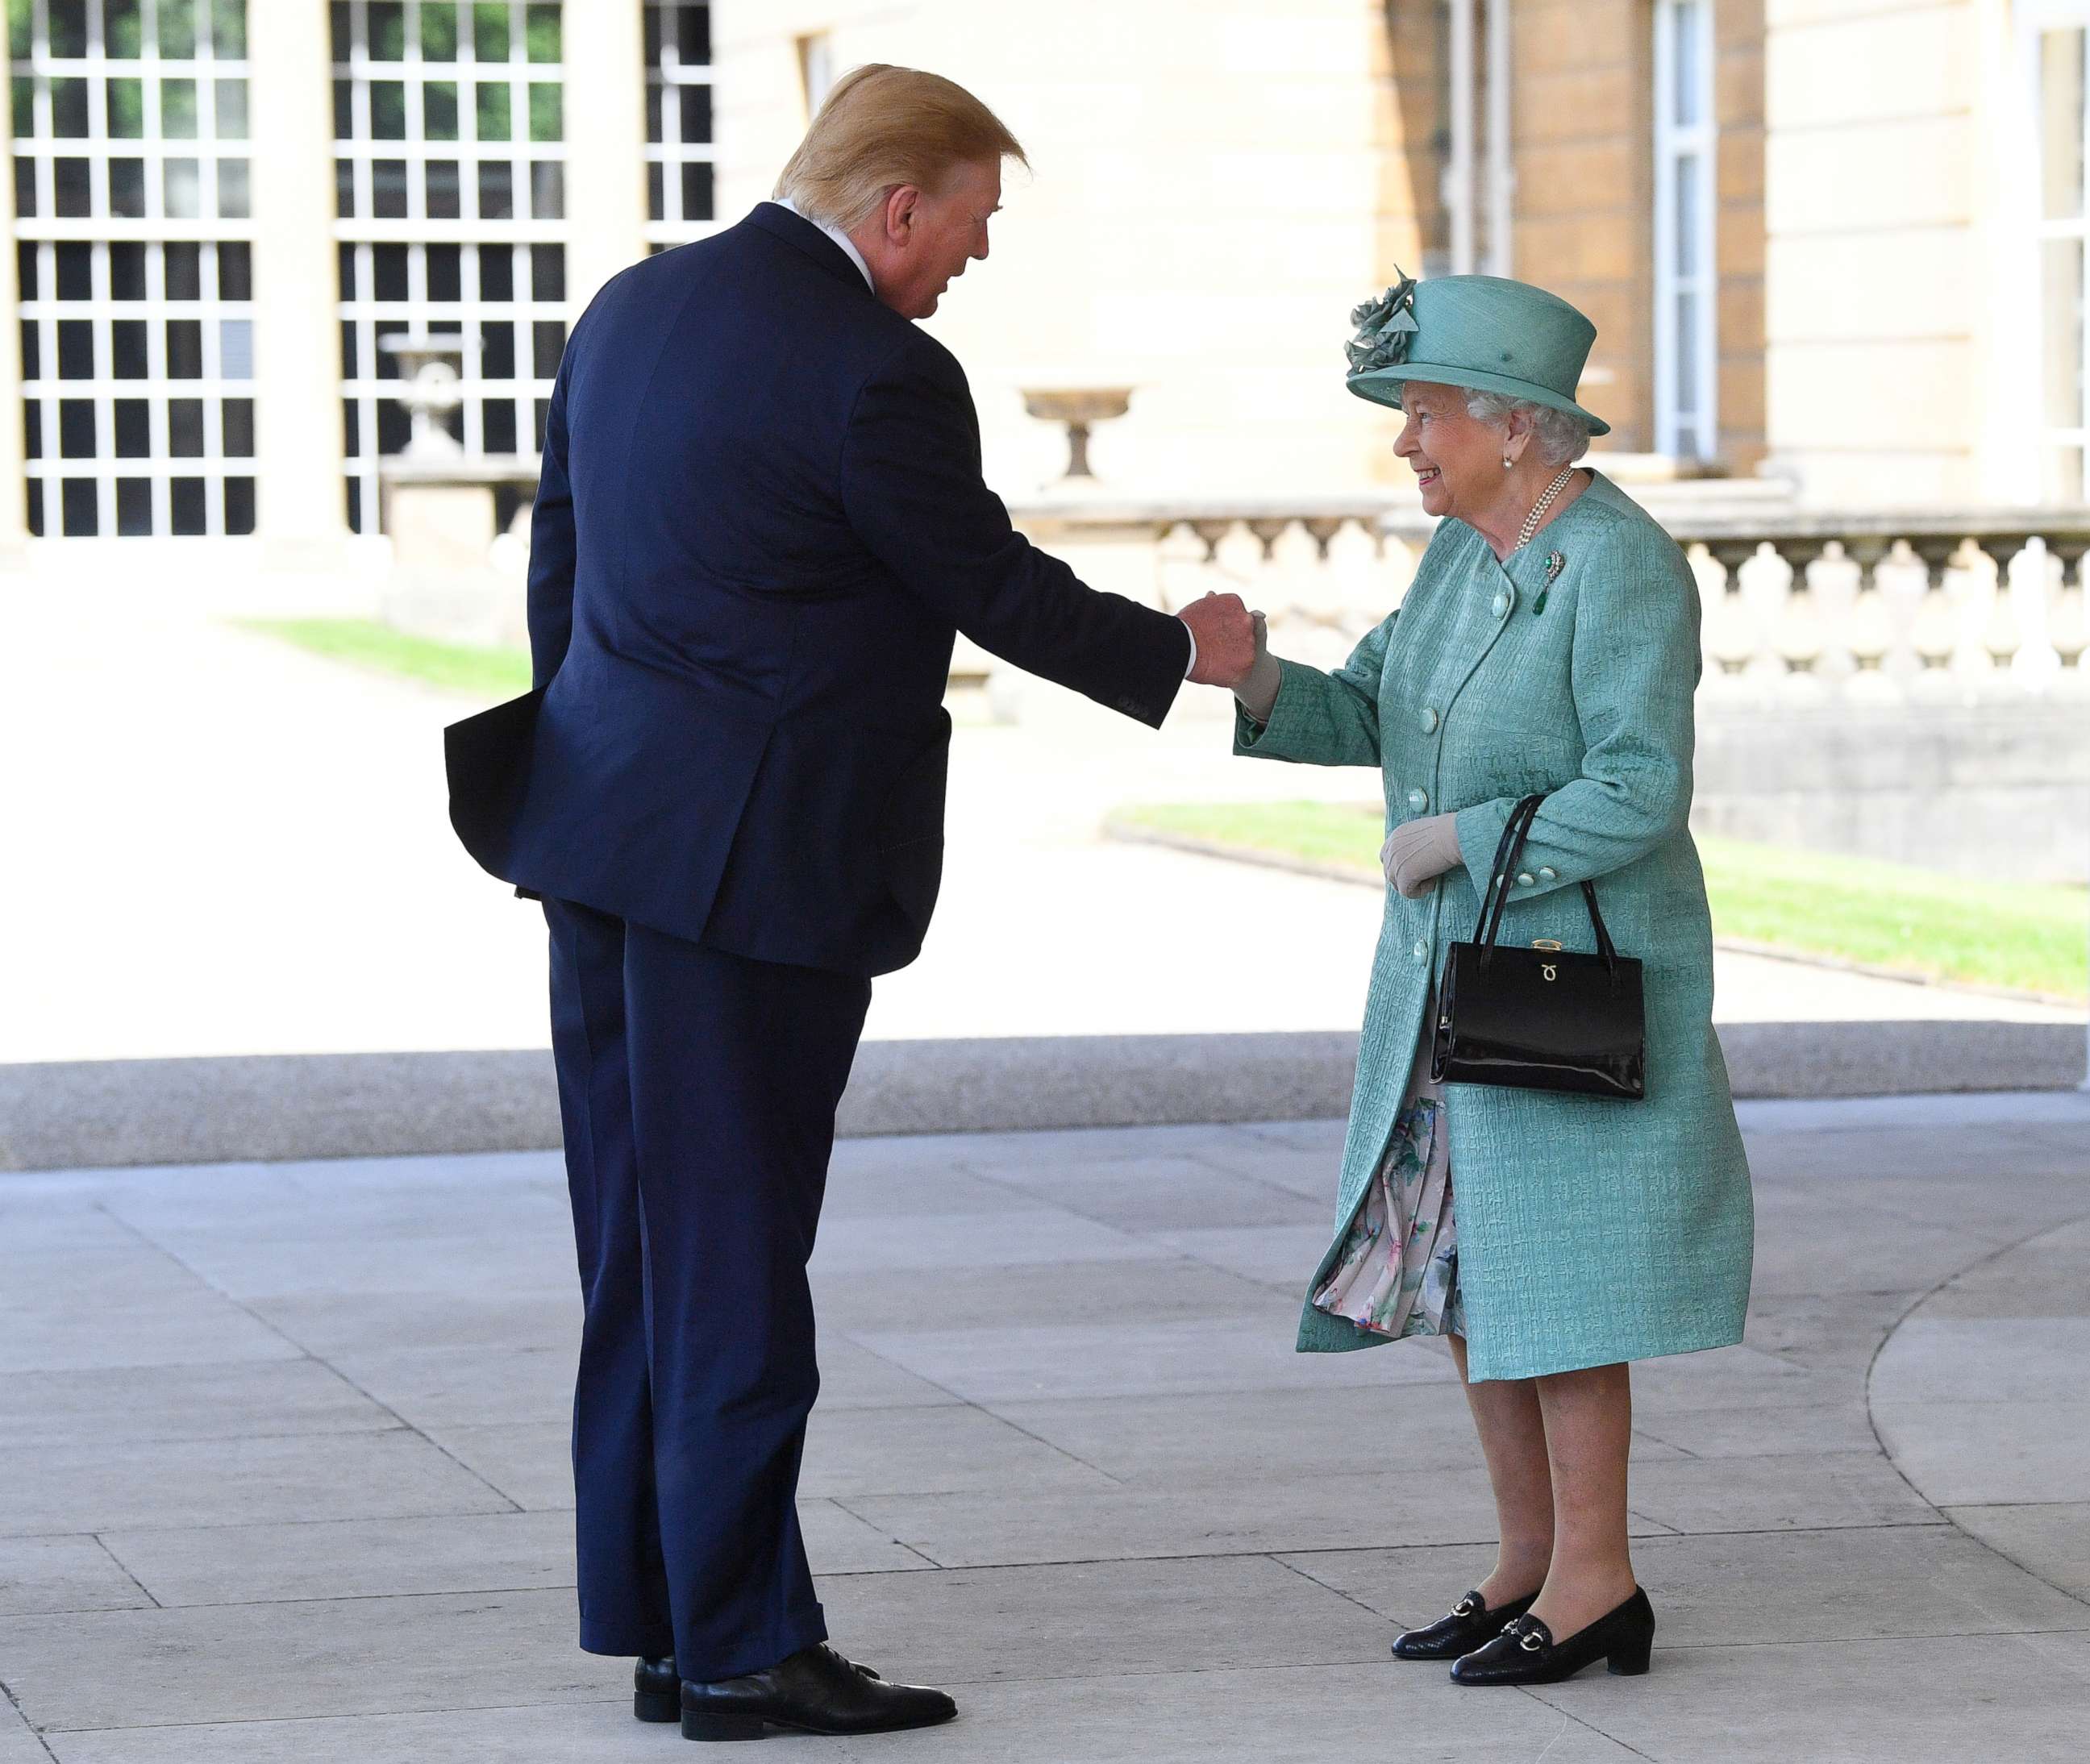 PHOTO: Britain's Queen Elizabeth II greets President Donald Trump as he arrives for the Ceremonial Welcome at Buckingham Palace, in London, June 3, 2019.